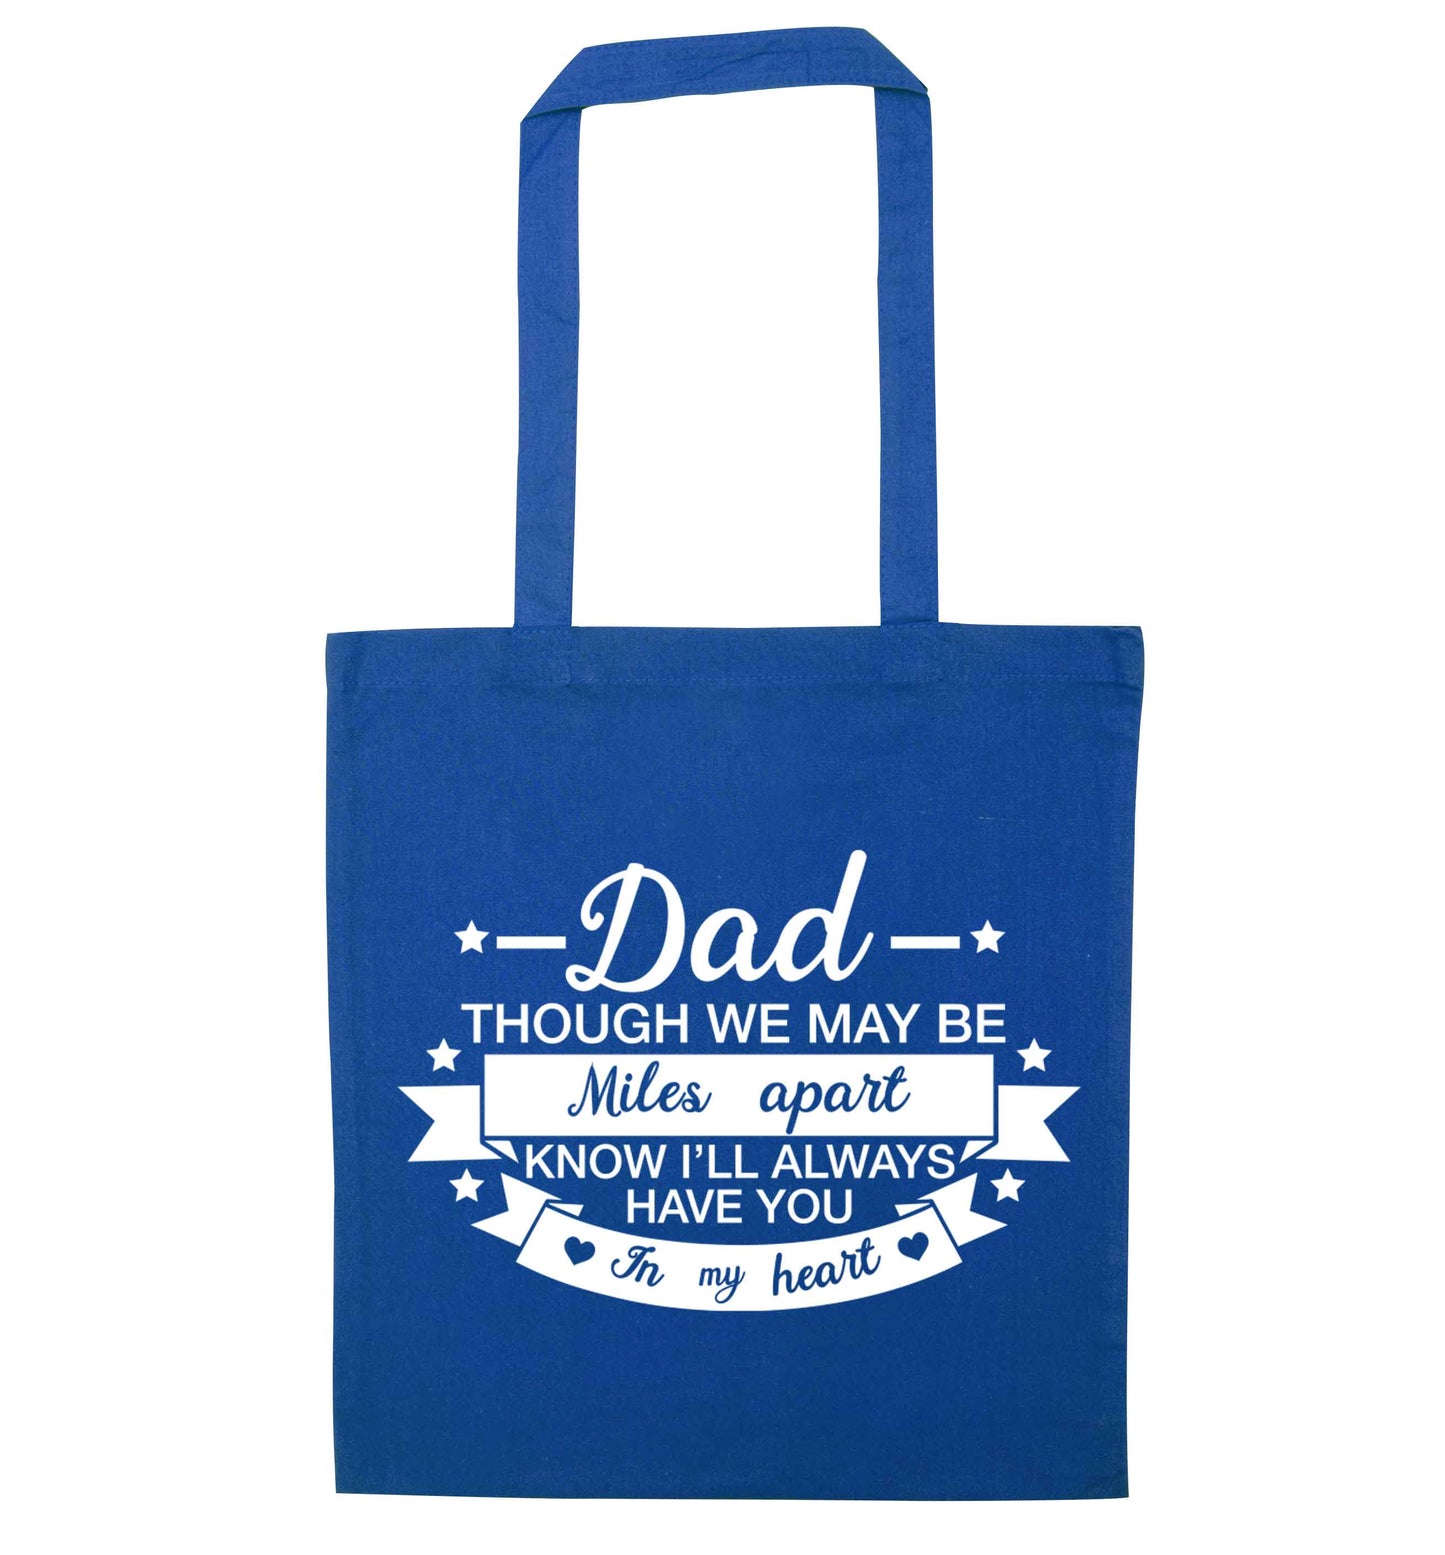 Dad though we are miles apart know I'll always have you in my heart blue tote bag